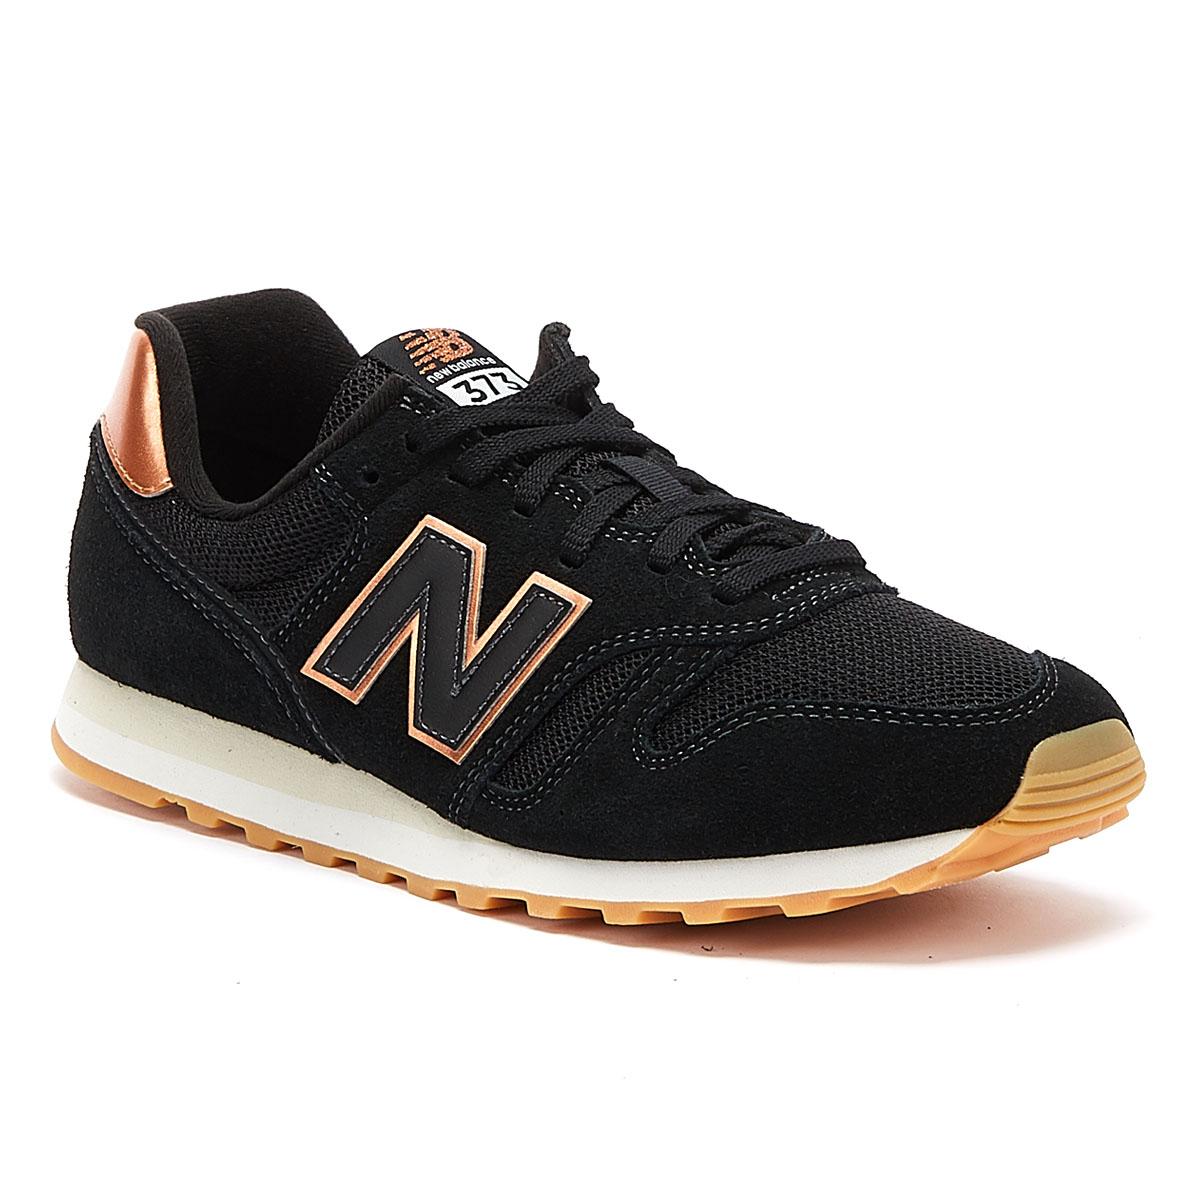 New Balance Suede 373 Womens Black / Rose Gold Trainers - Lyst